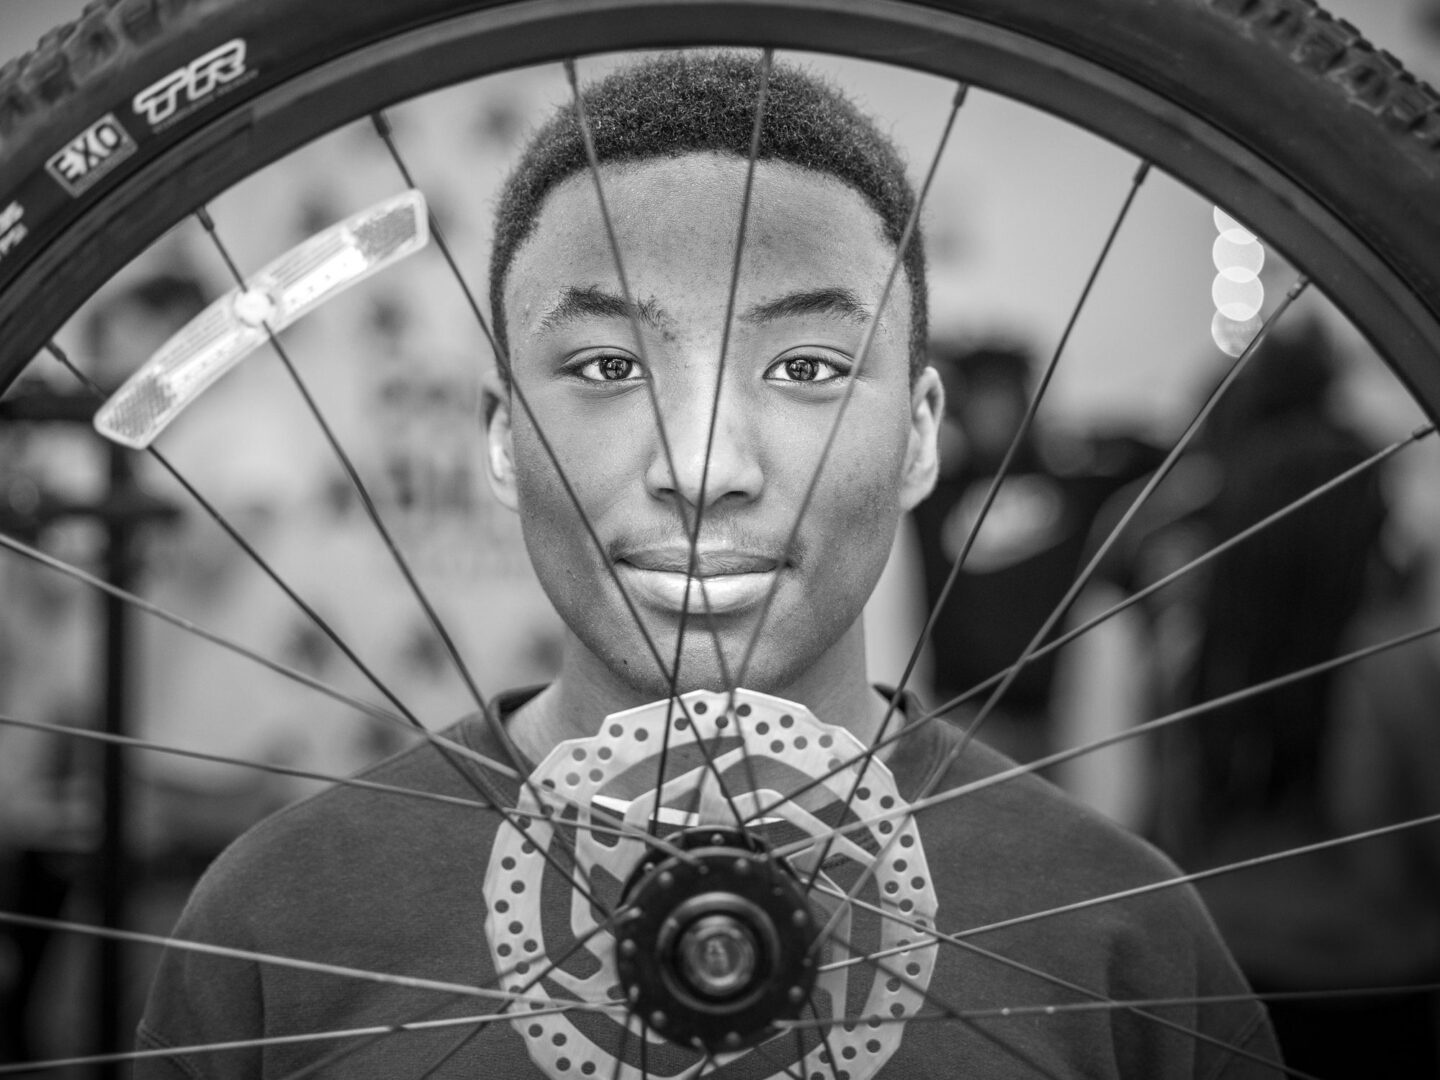 A boy's smiling face behind the spokes of a bicycle wheel.